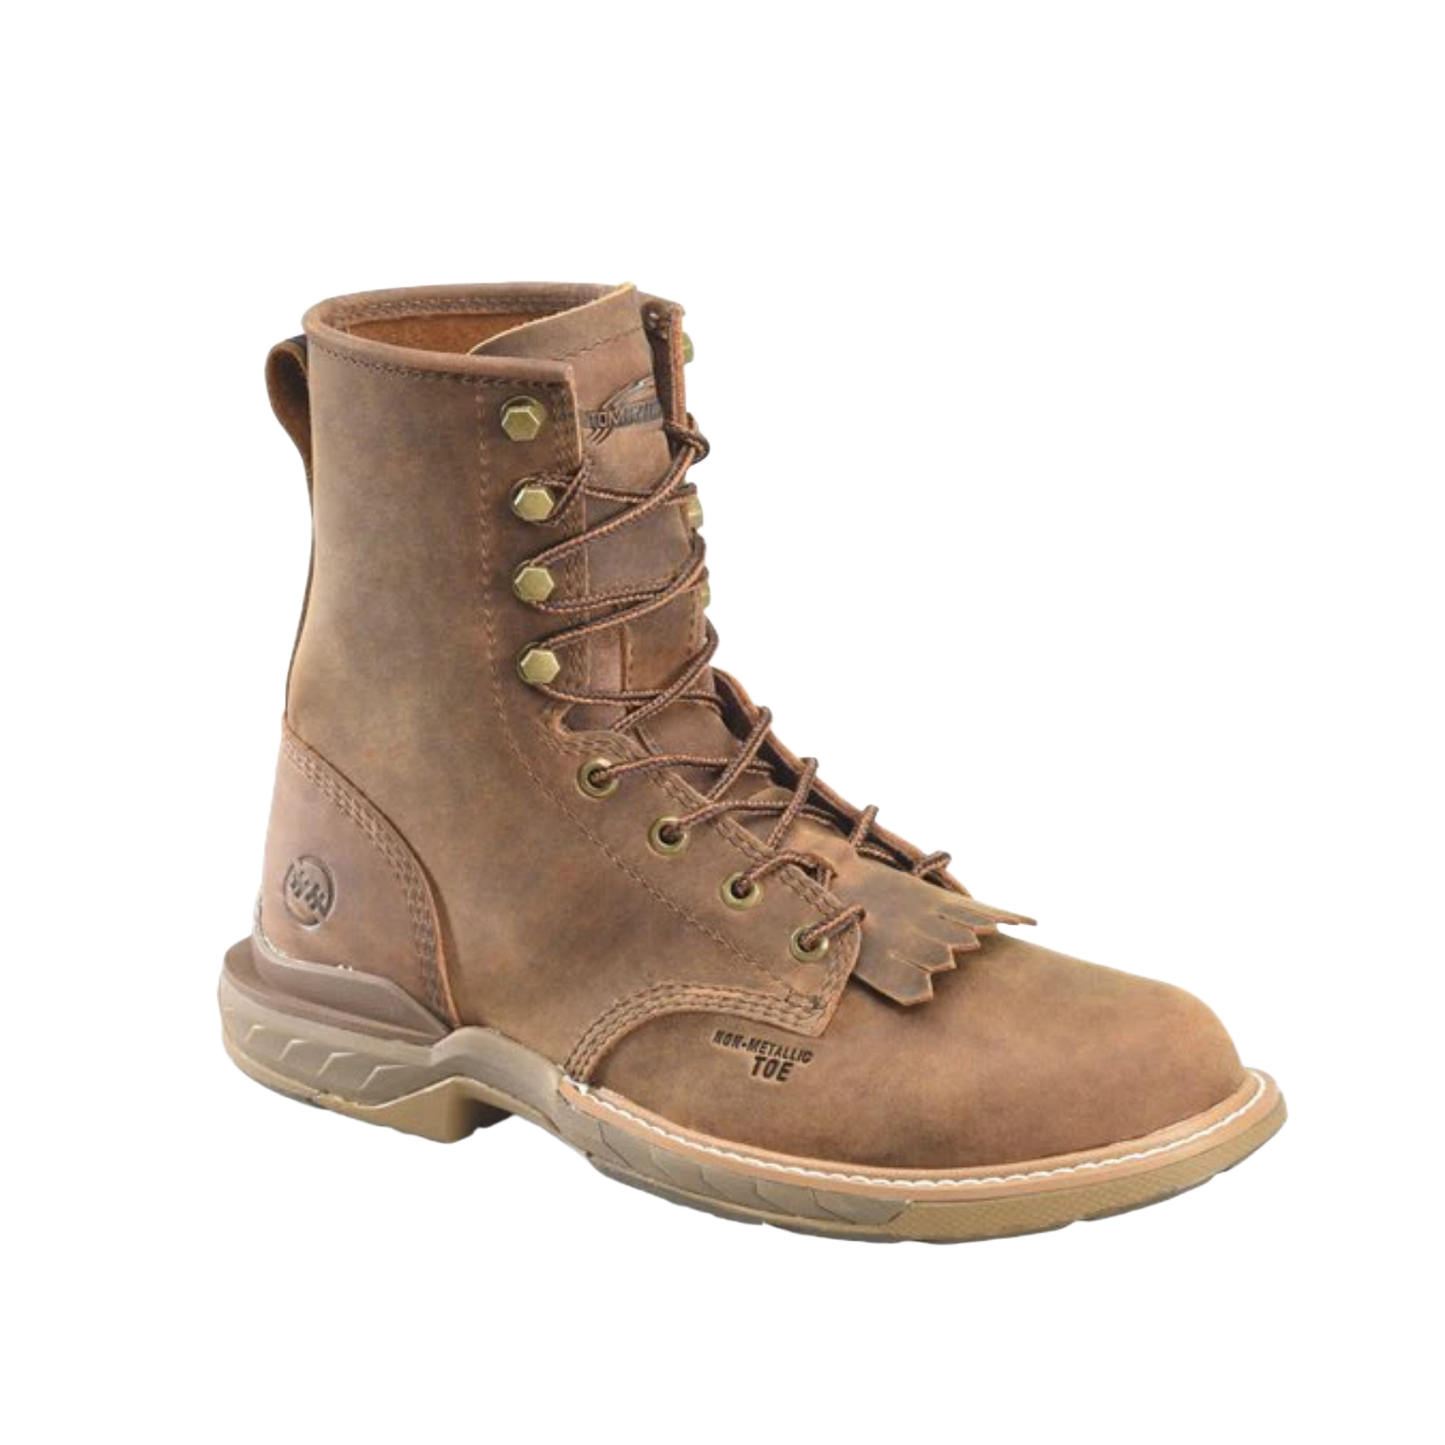 Double H® Men's 8" U Toe Lacer Medium Brown Work Boots DH5394